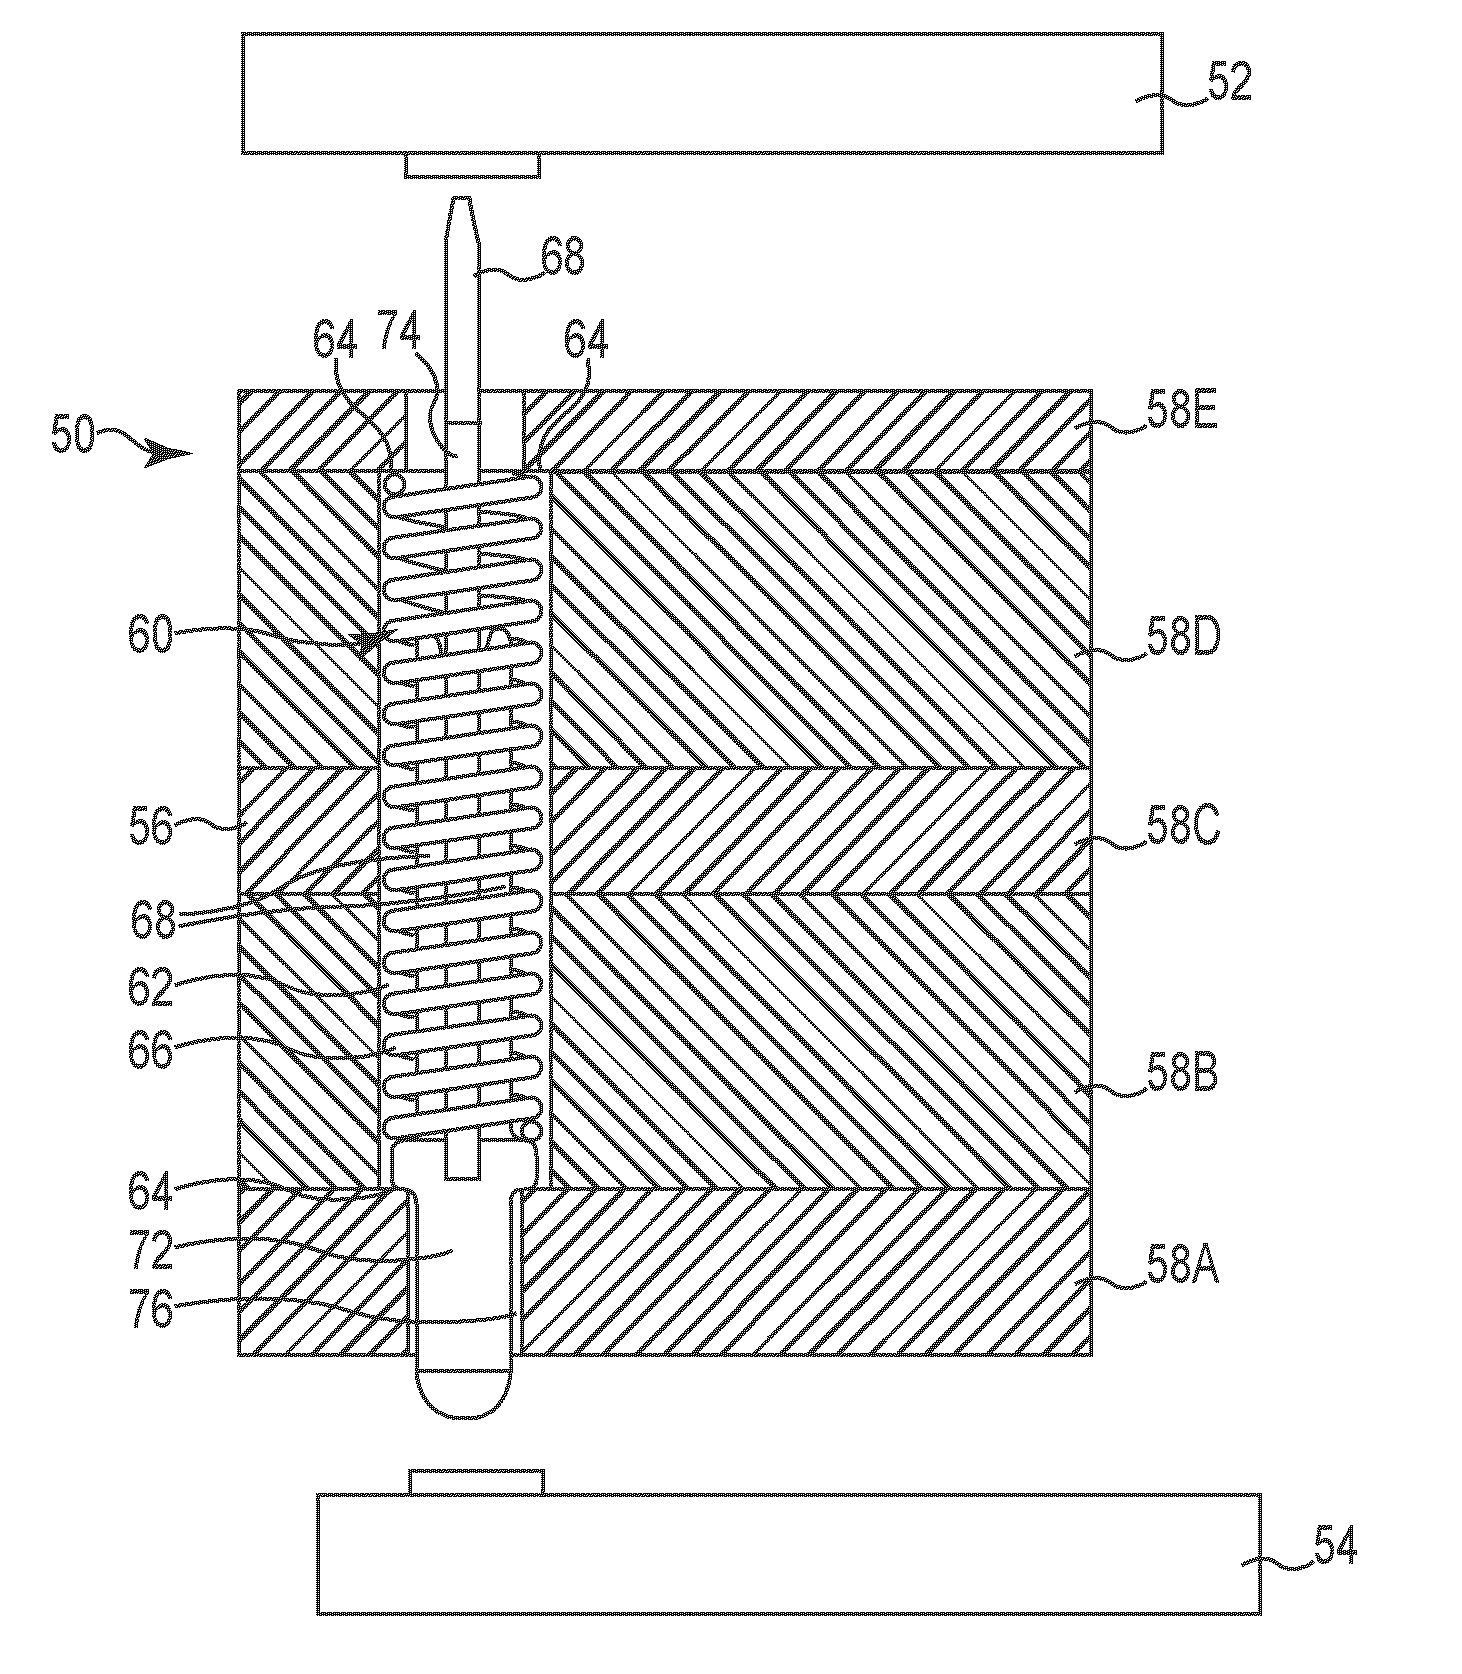 Selective metalization of electrical connector or socket housing